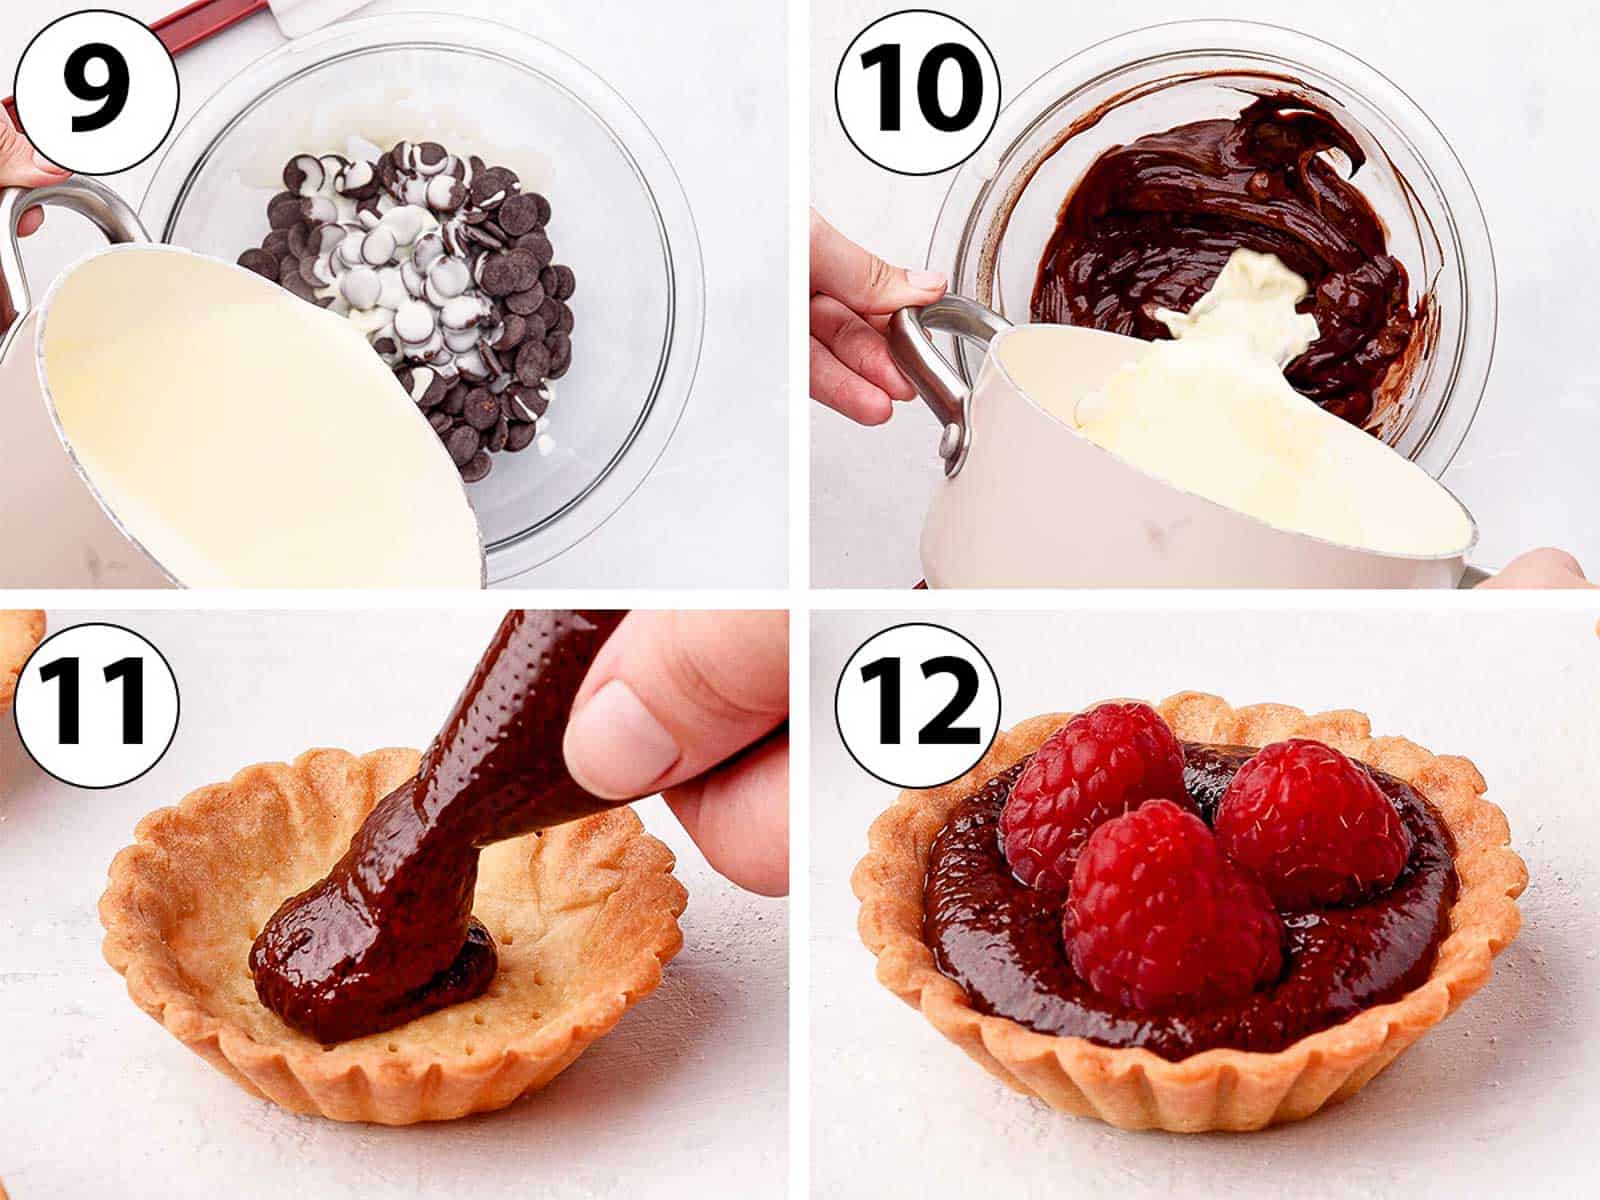 Process Shot Collage: making the chocolate ganache filling and assembling the tartlets with the raspberries.